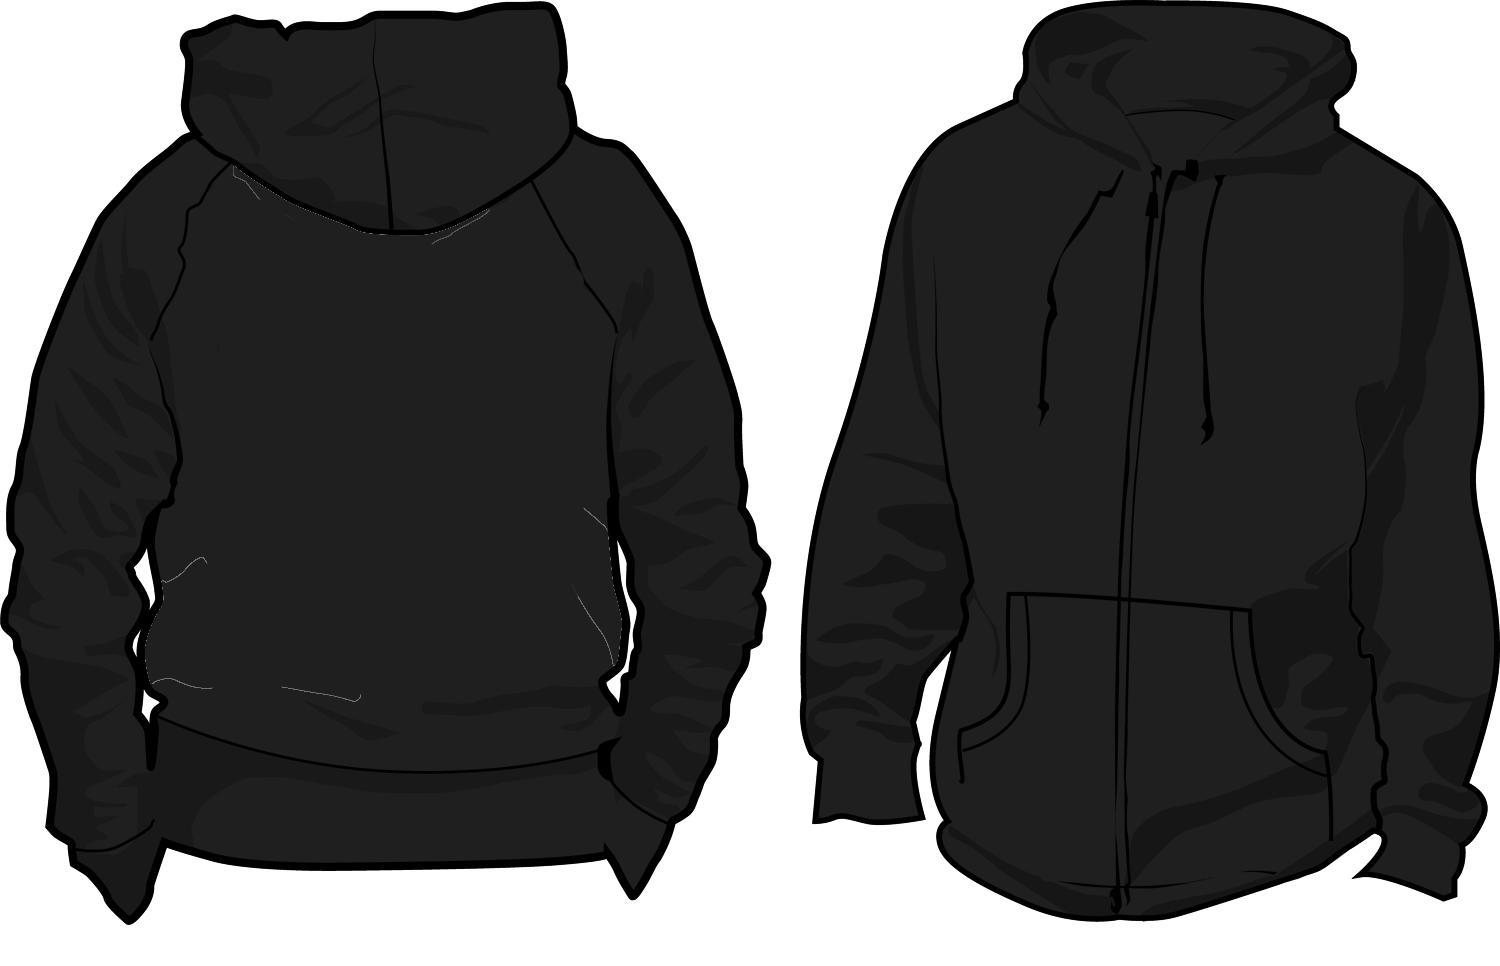 Hoodie clipart template front, Hoodie template front Transparent FREE ...